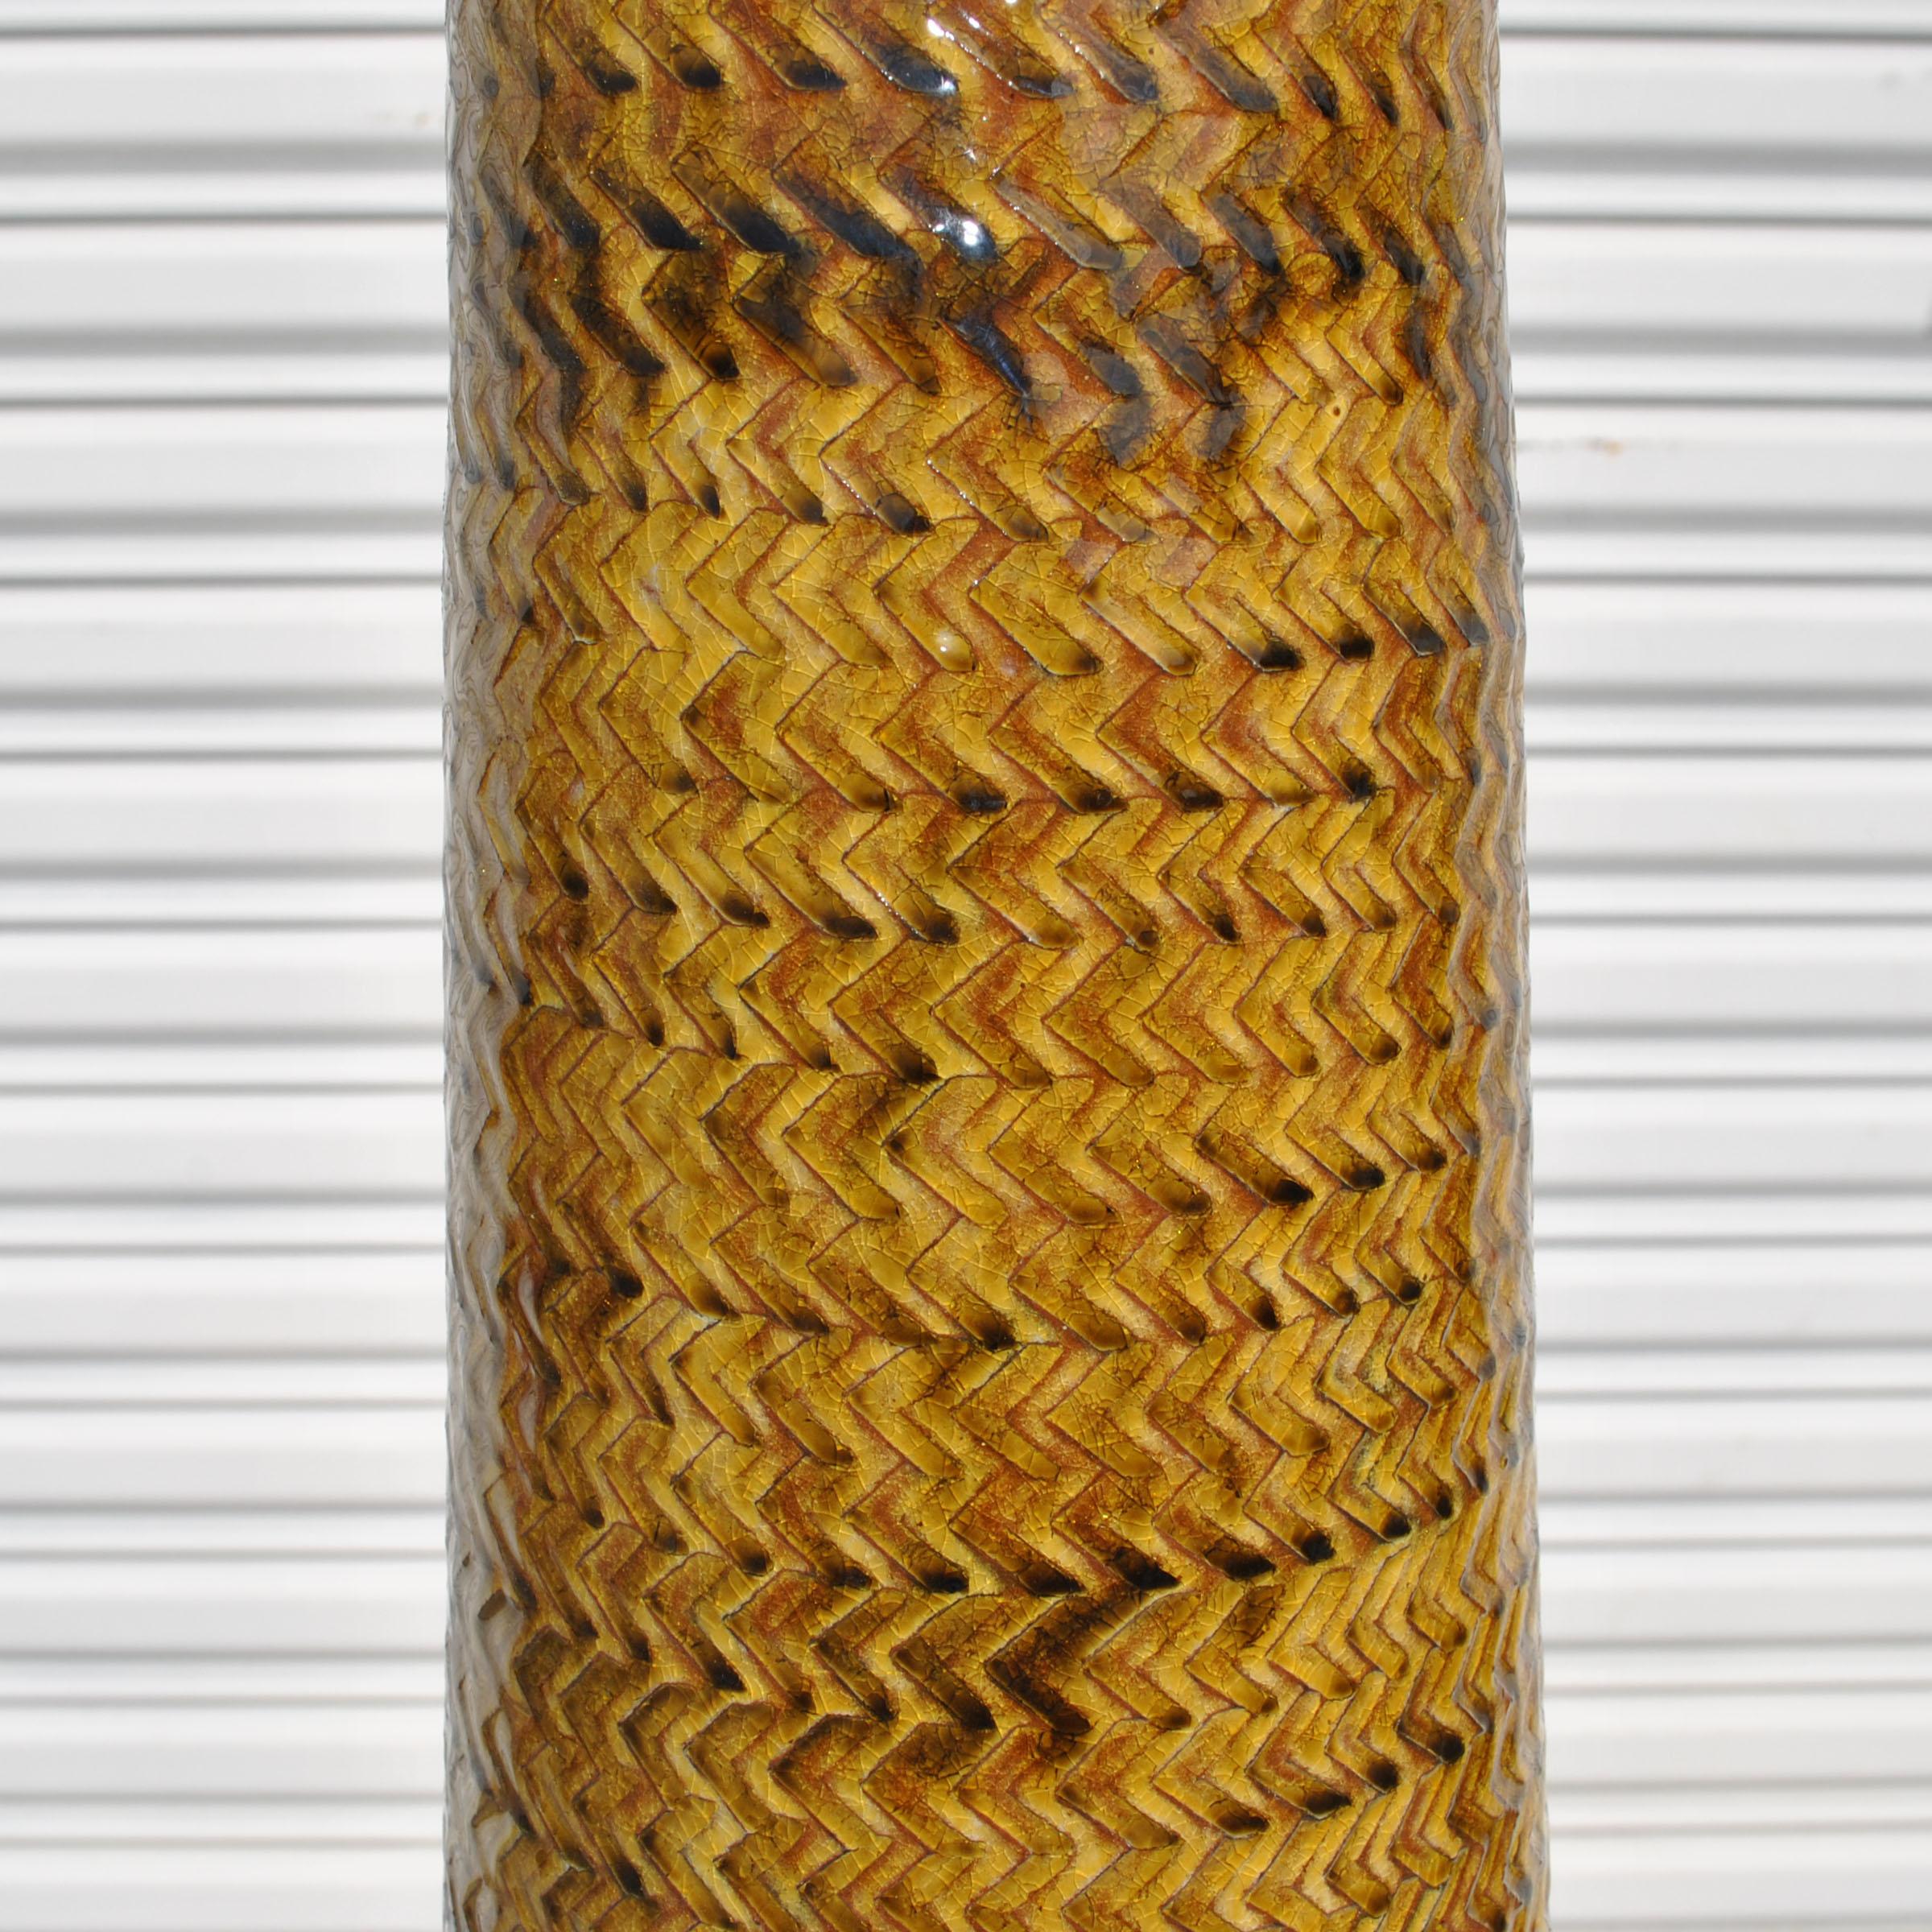 Pair of Ceramic Table Lamps in a Woven Motif 1